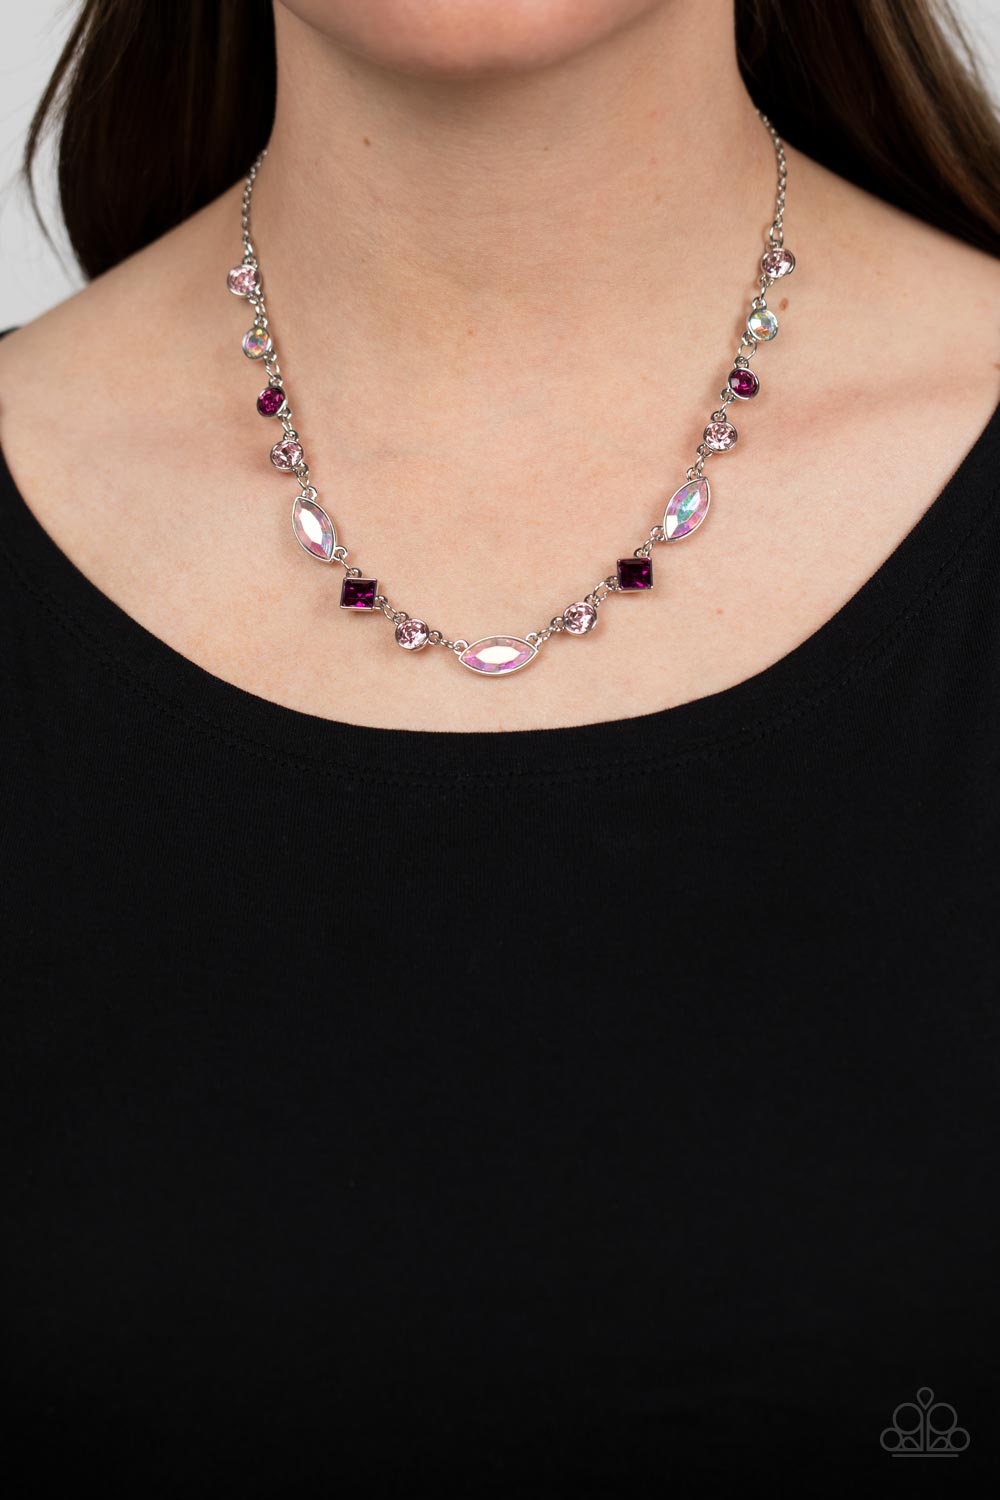 Paparazzi Necklaces - Irresistible Heir-idescence - Pink